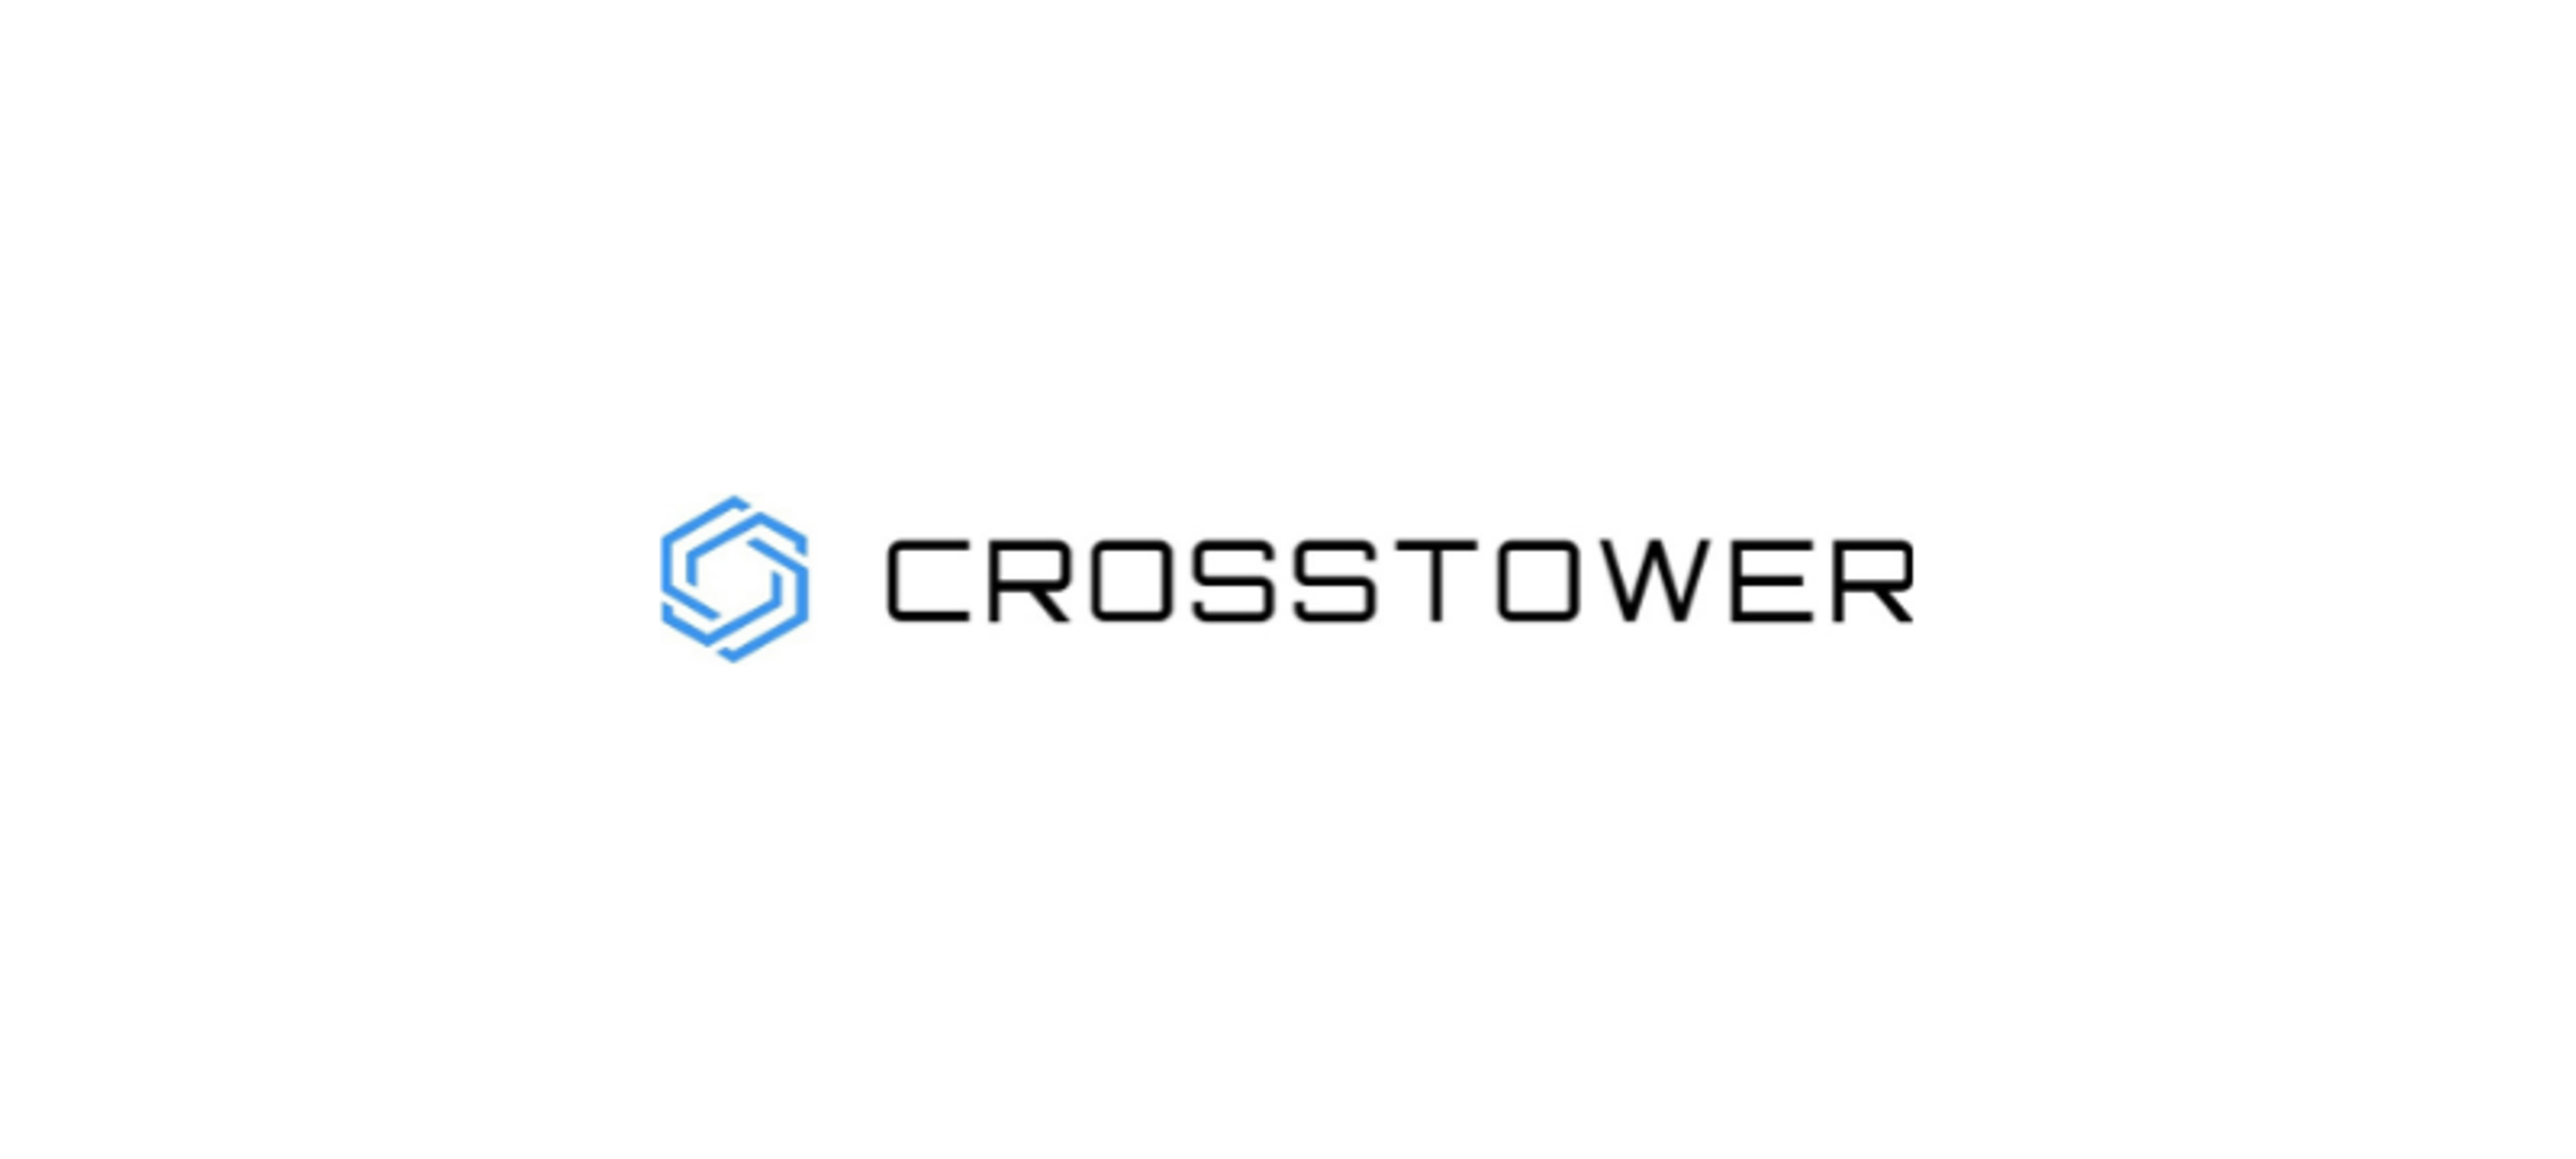 CrossTower Takes Aim At NFTs, Lending And Institutional Asset Management In Crypto